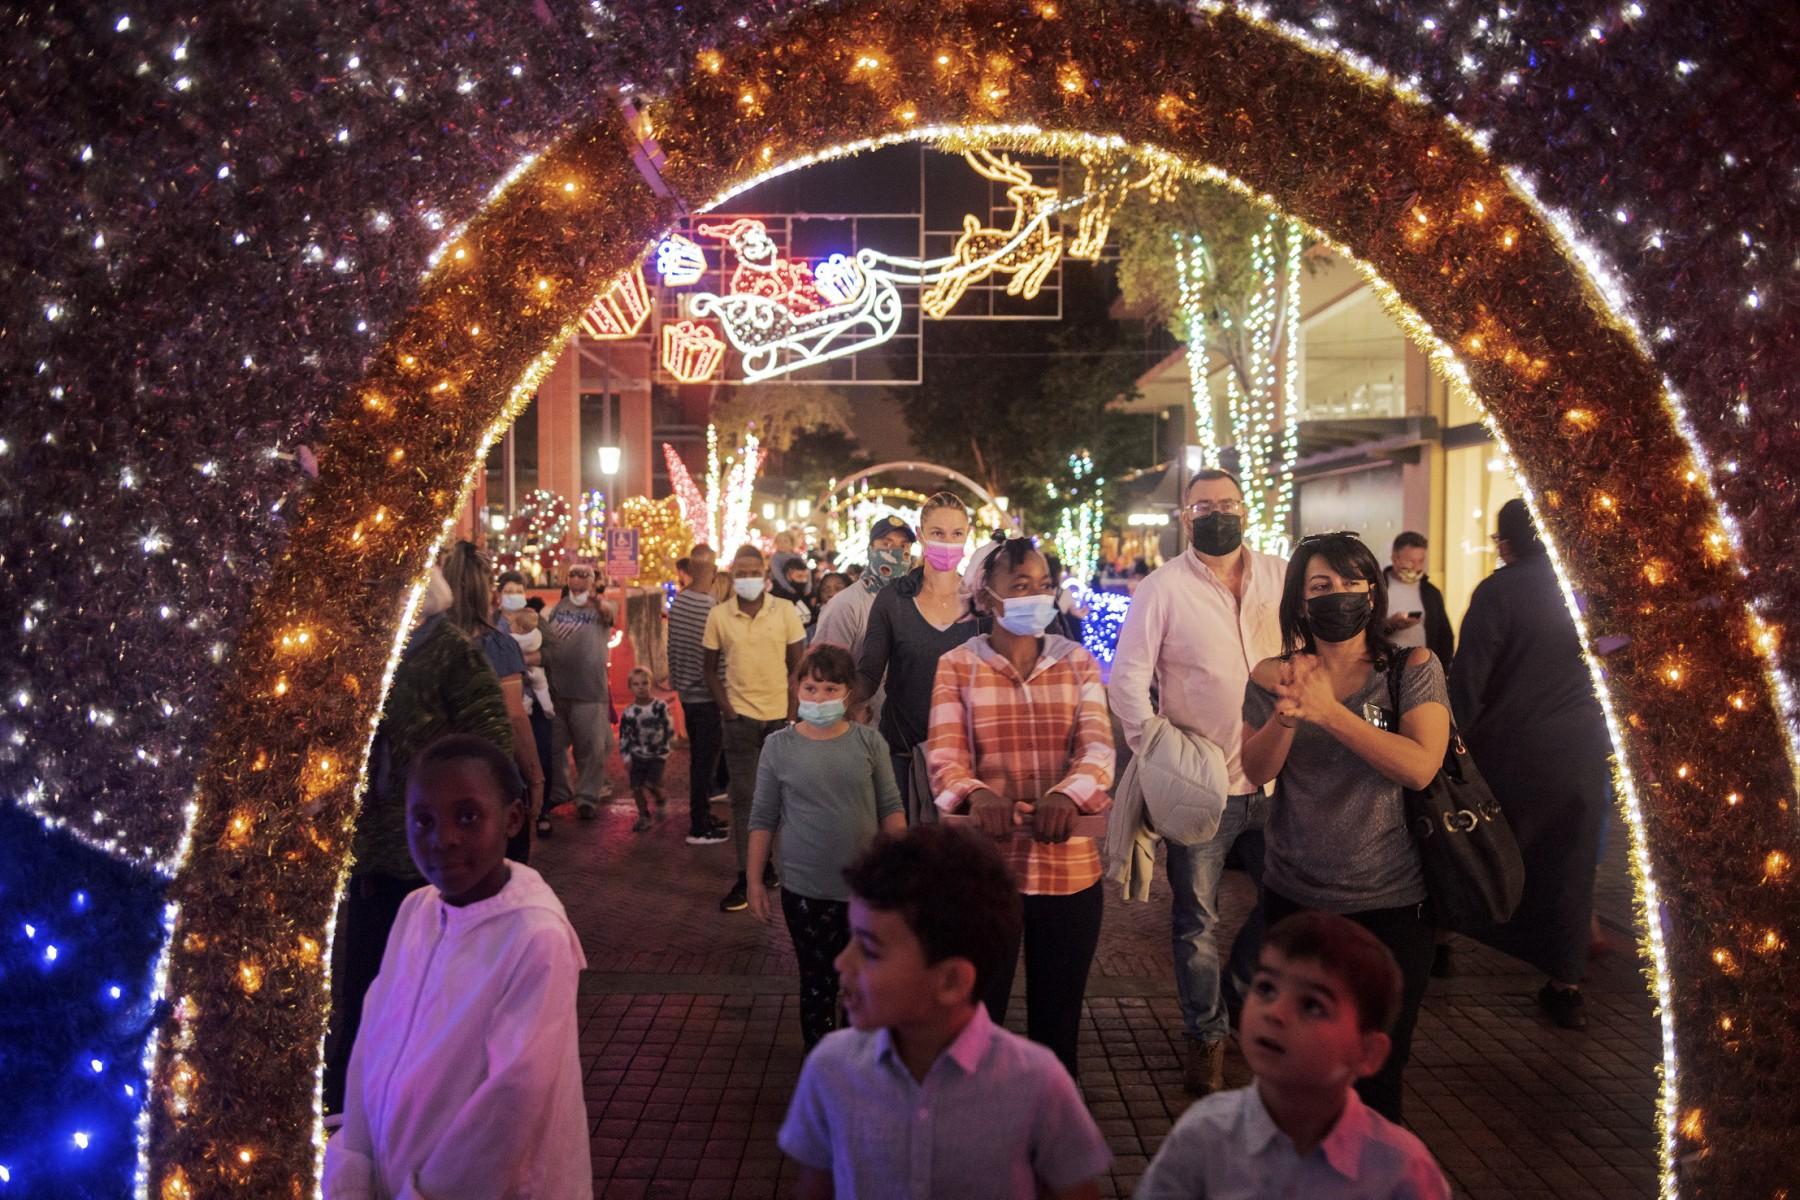 People enjoy Christmas decorations in Melrose Arch, Johannesburg, on Dec 21. Photo: AFP